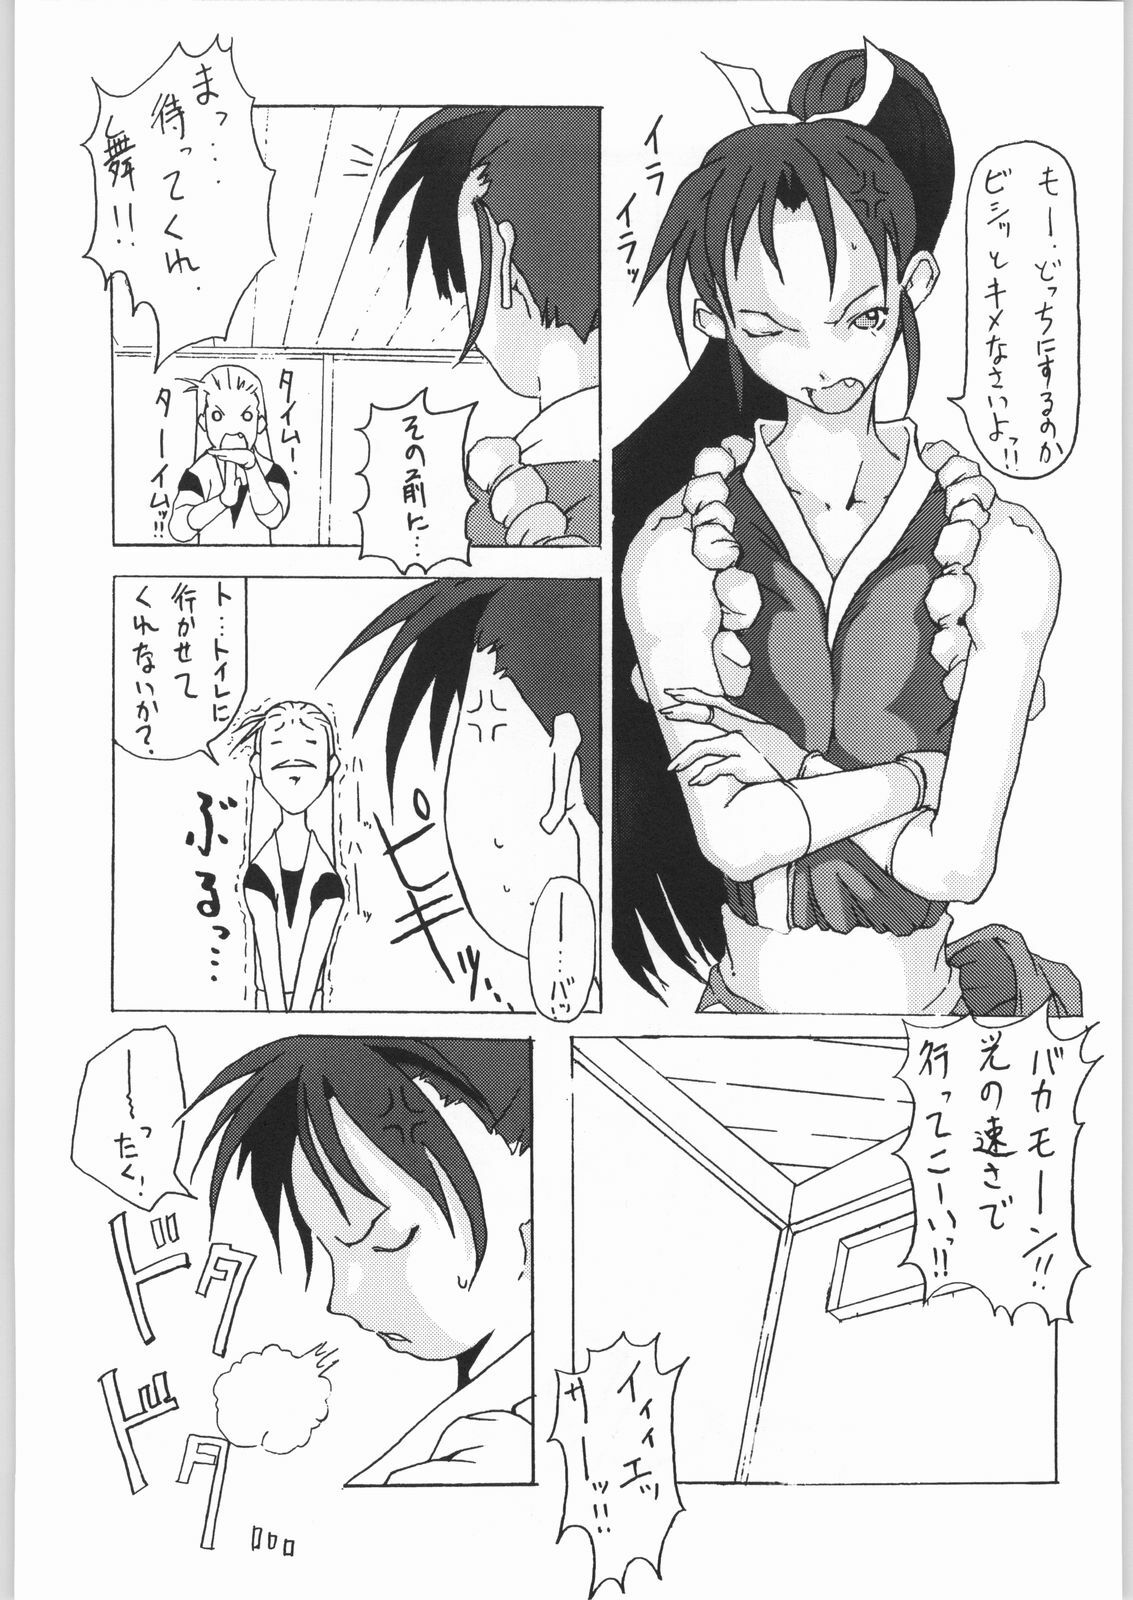 [SNK] Shiranui (Over Flows) page 8 full